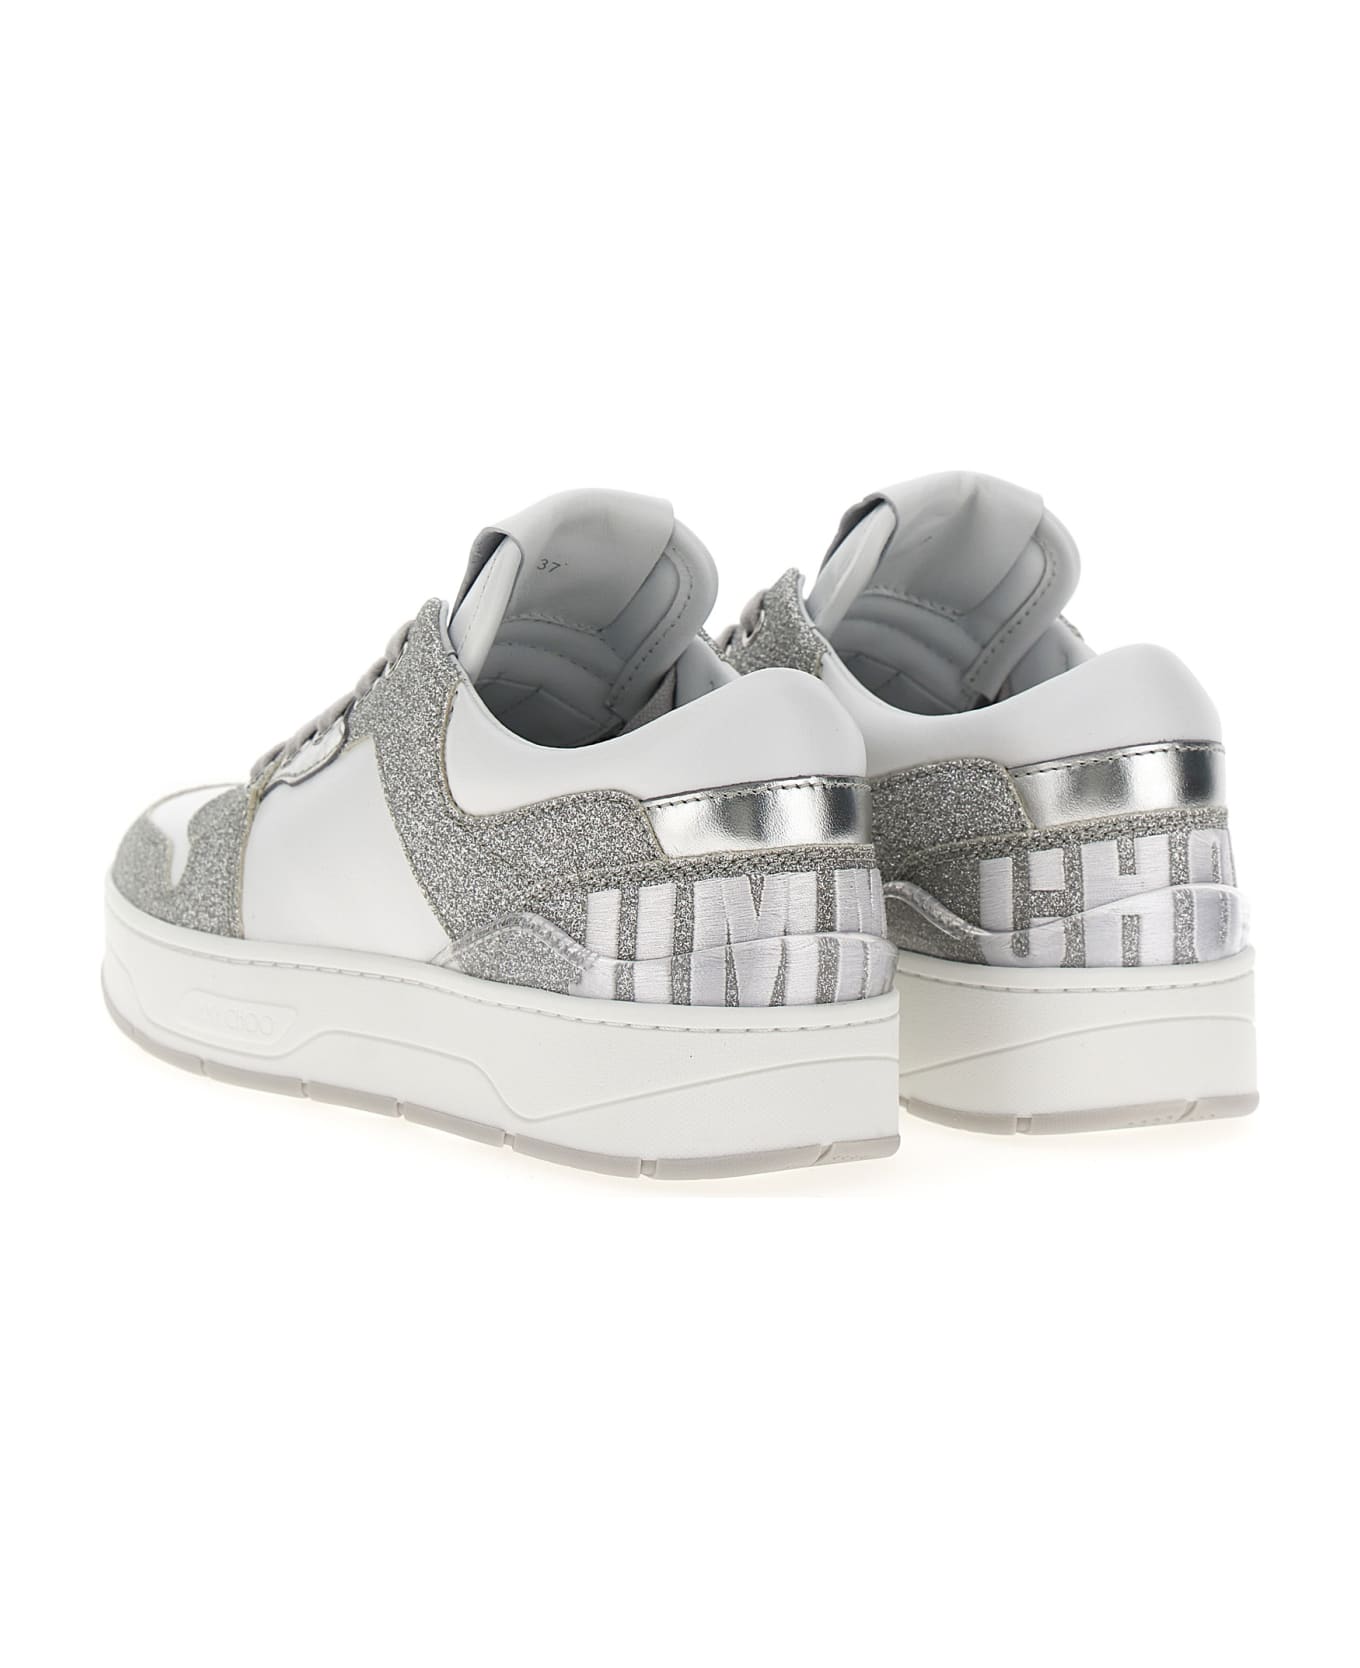 Jimmy Choo Florence Sneakers - X Silver White